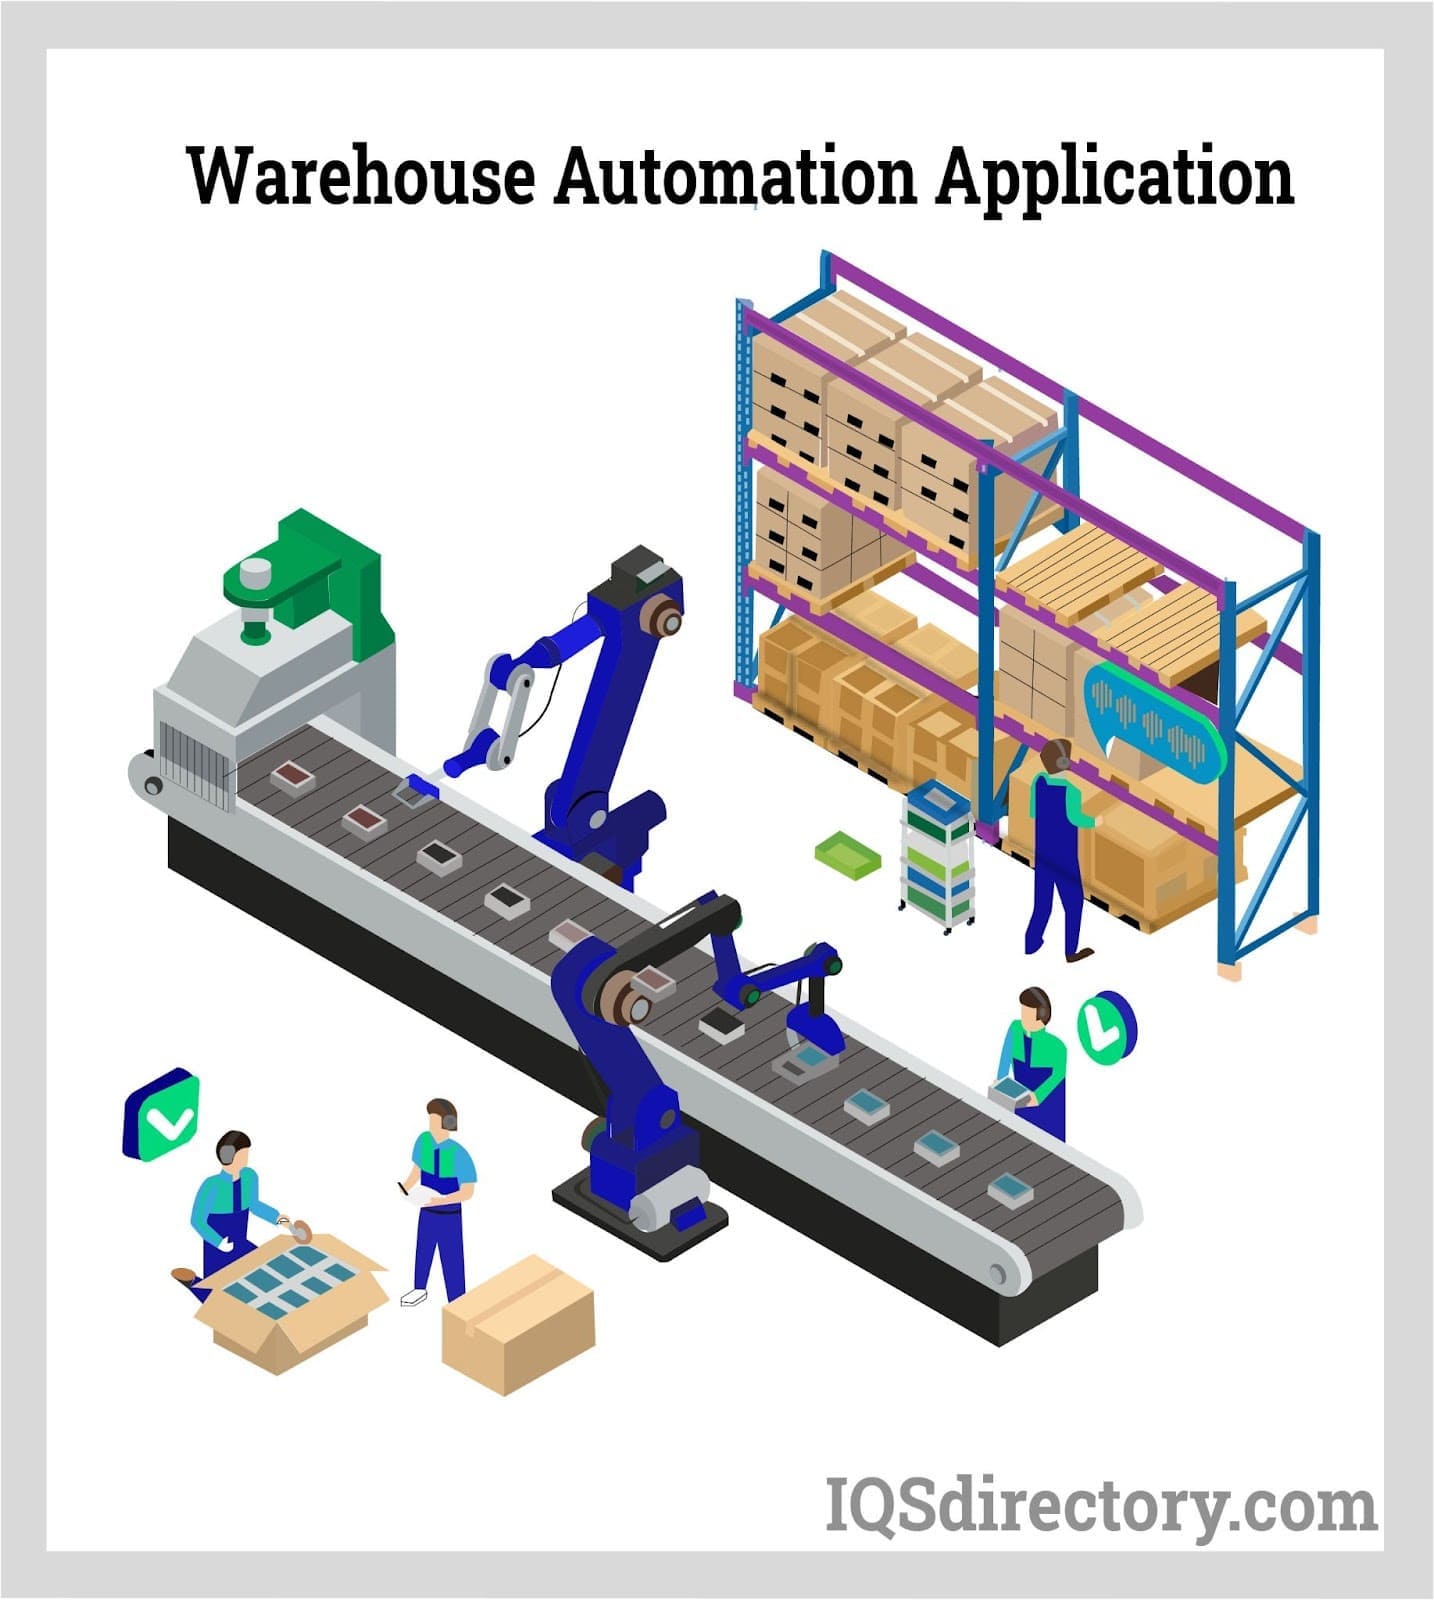 Warehouse Automation Application